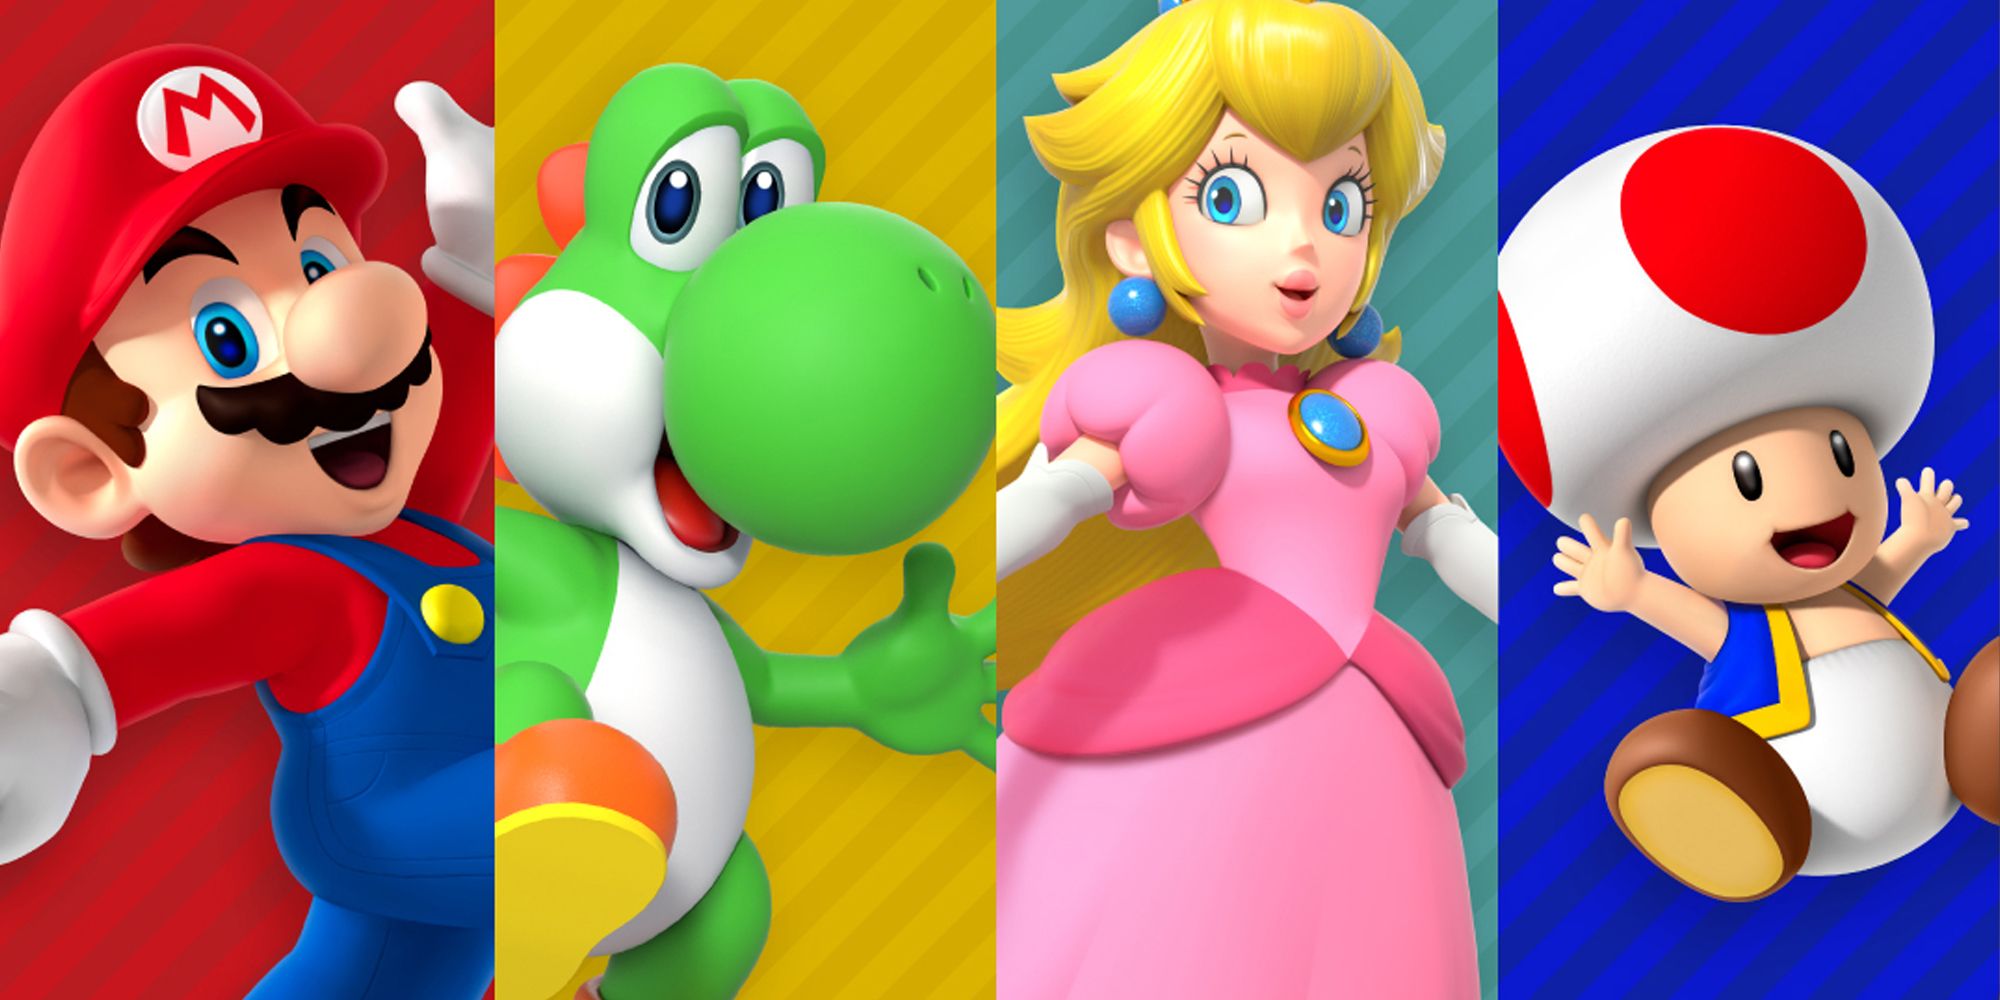 Mario on a red background, Yoshi on a yellow background, Princess Peach on a teal background, and Toad on a blue background, split into four rectangles